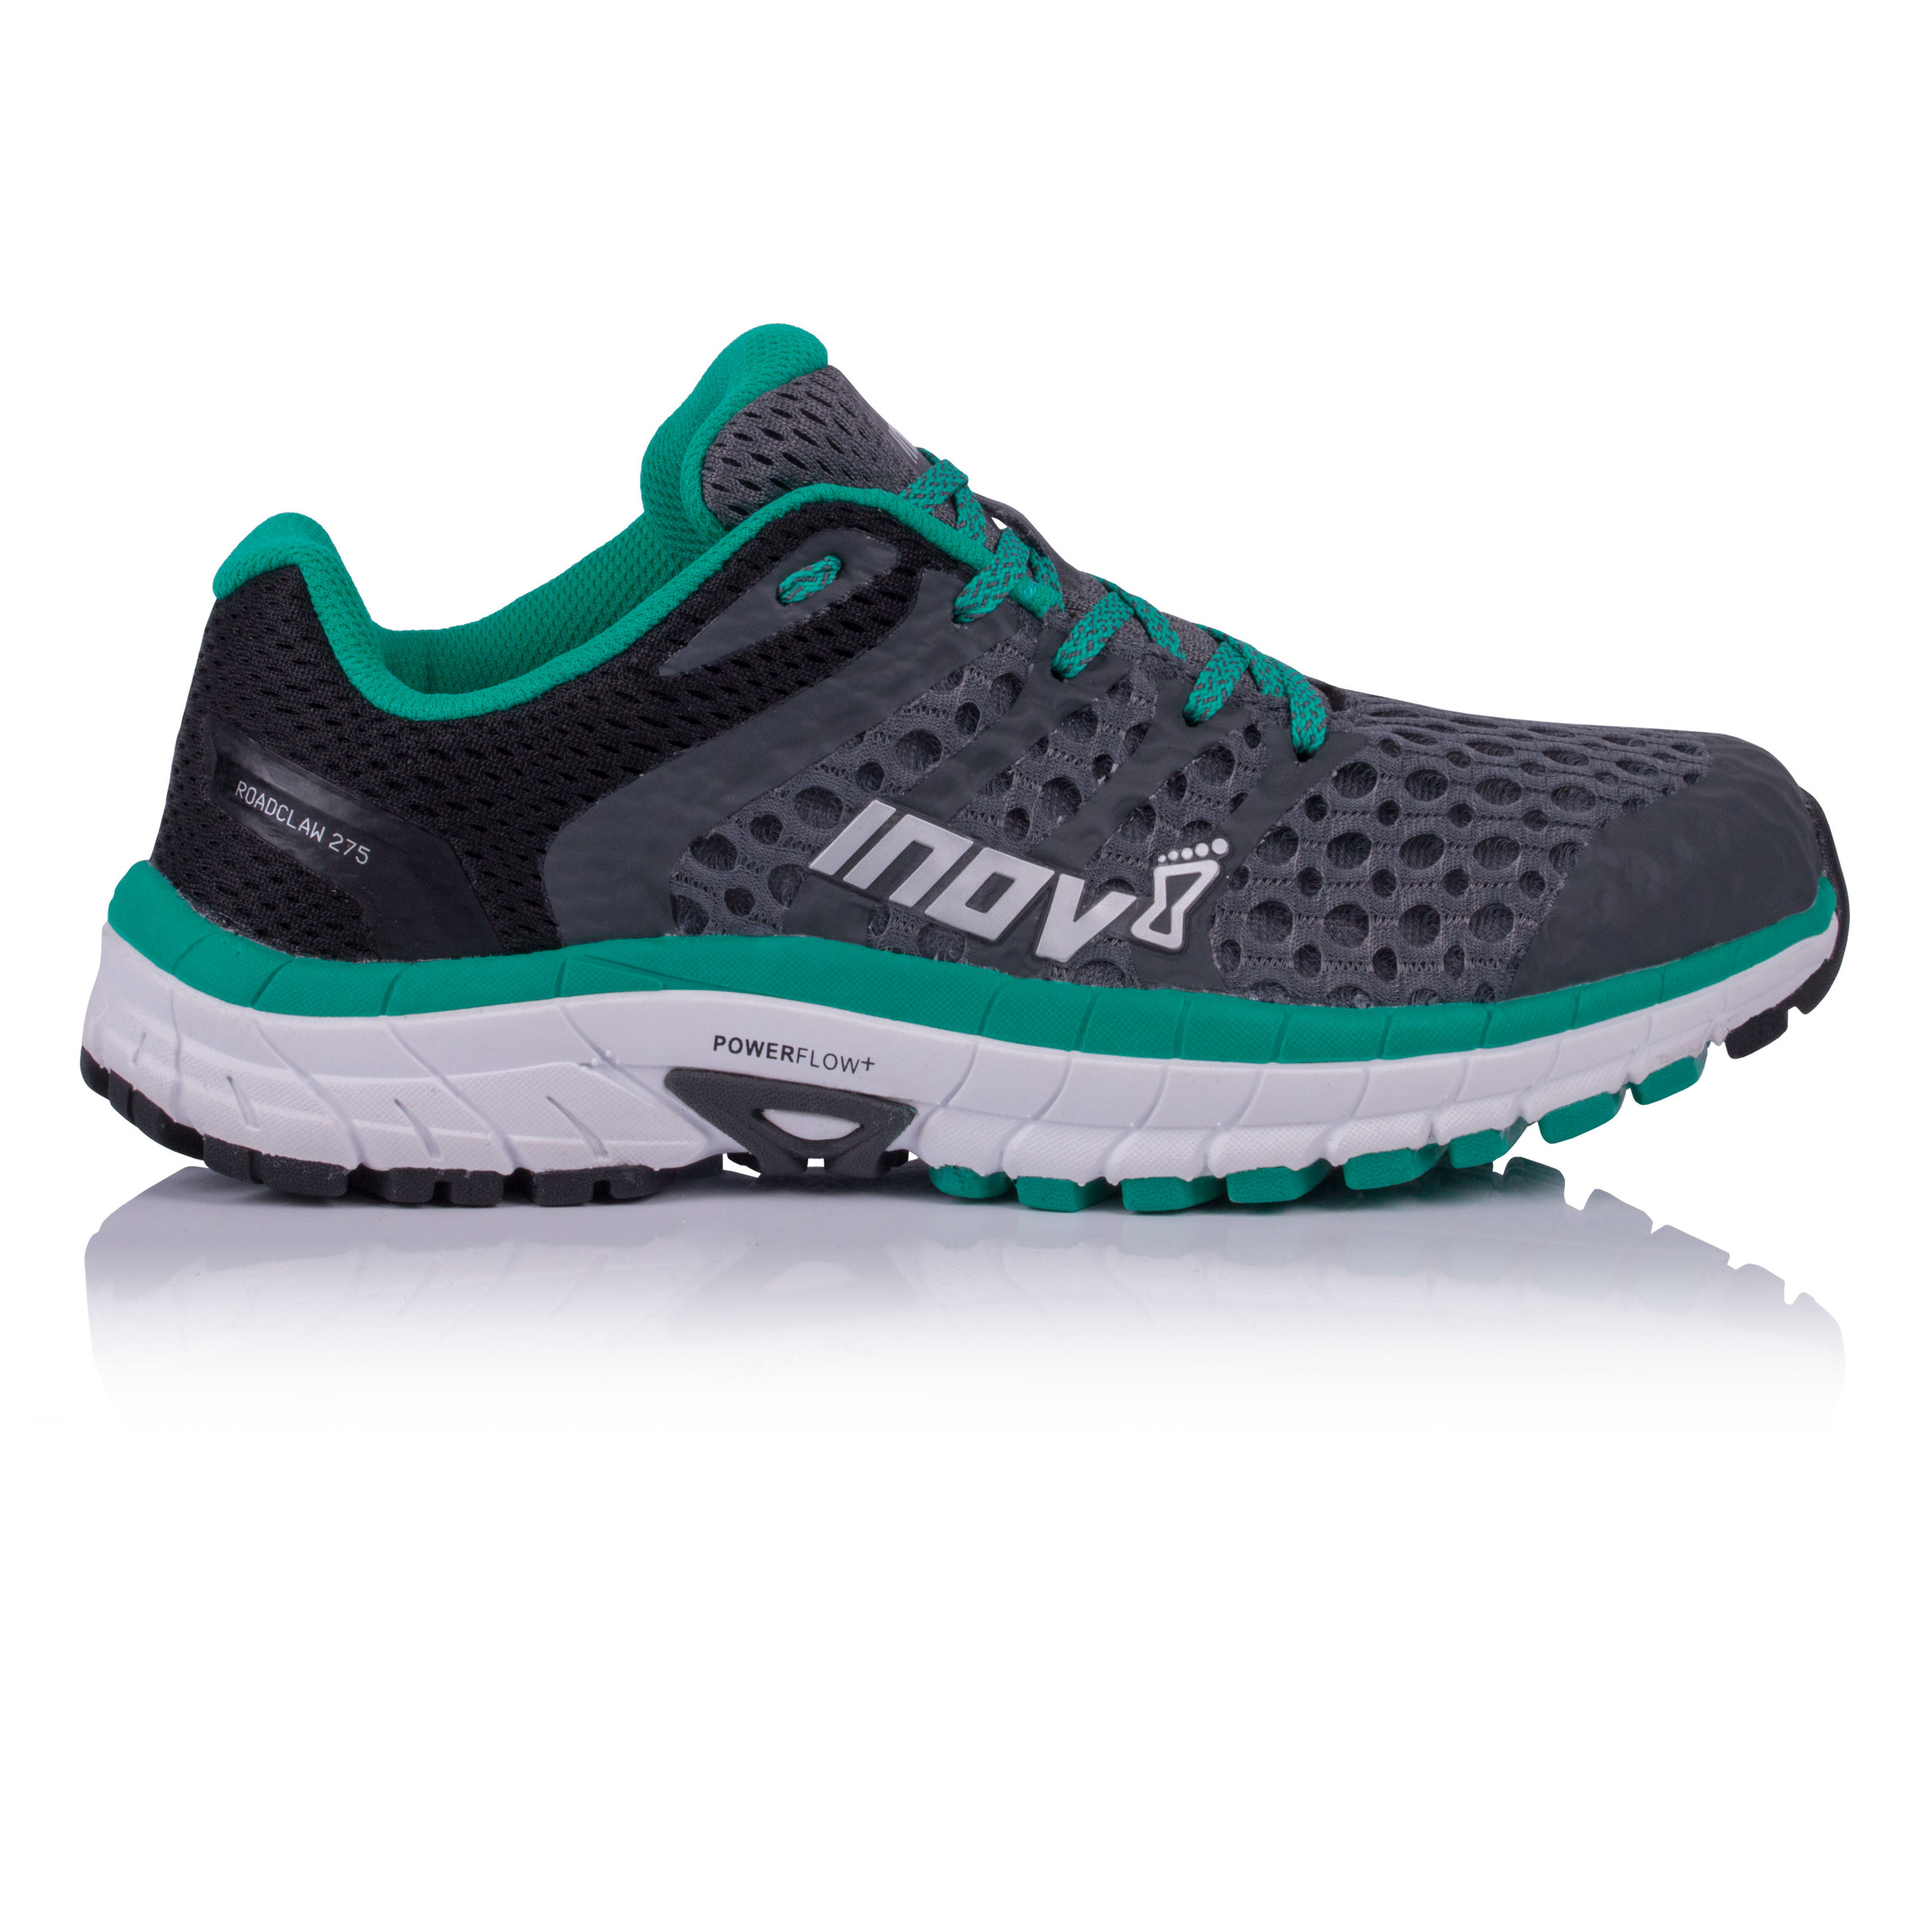 Inov8 Road Claw 275 V2 Women's Running Shoes